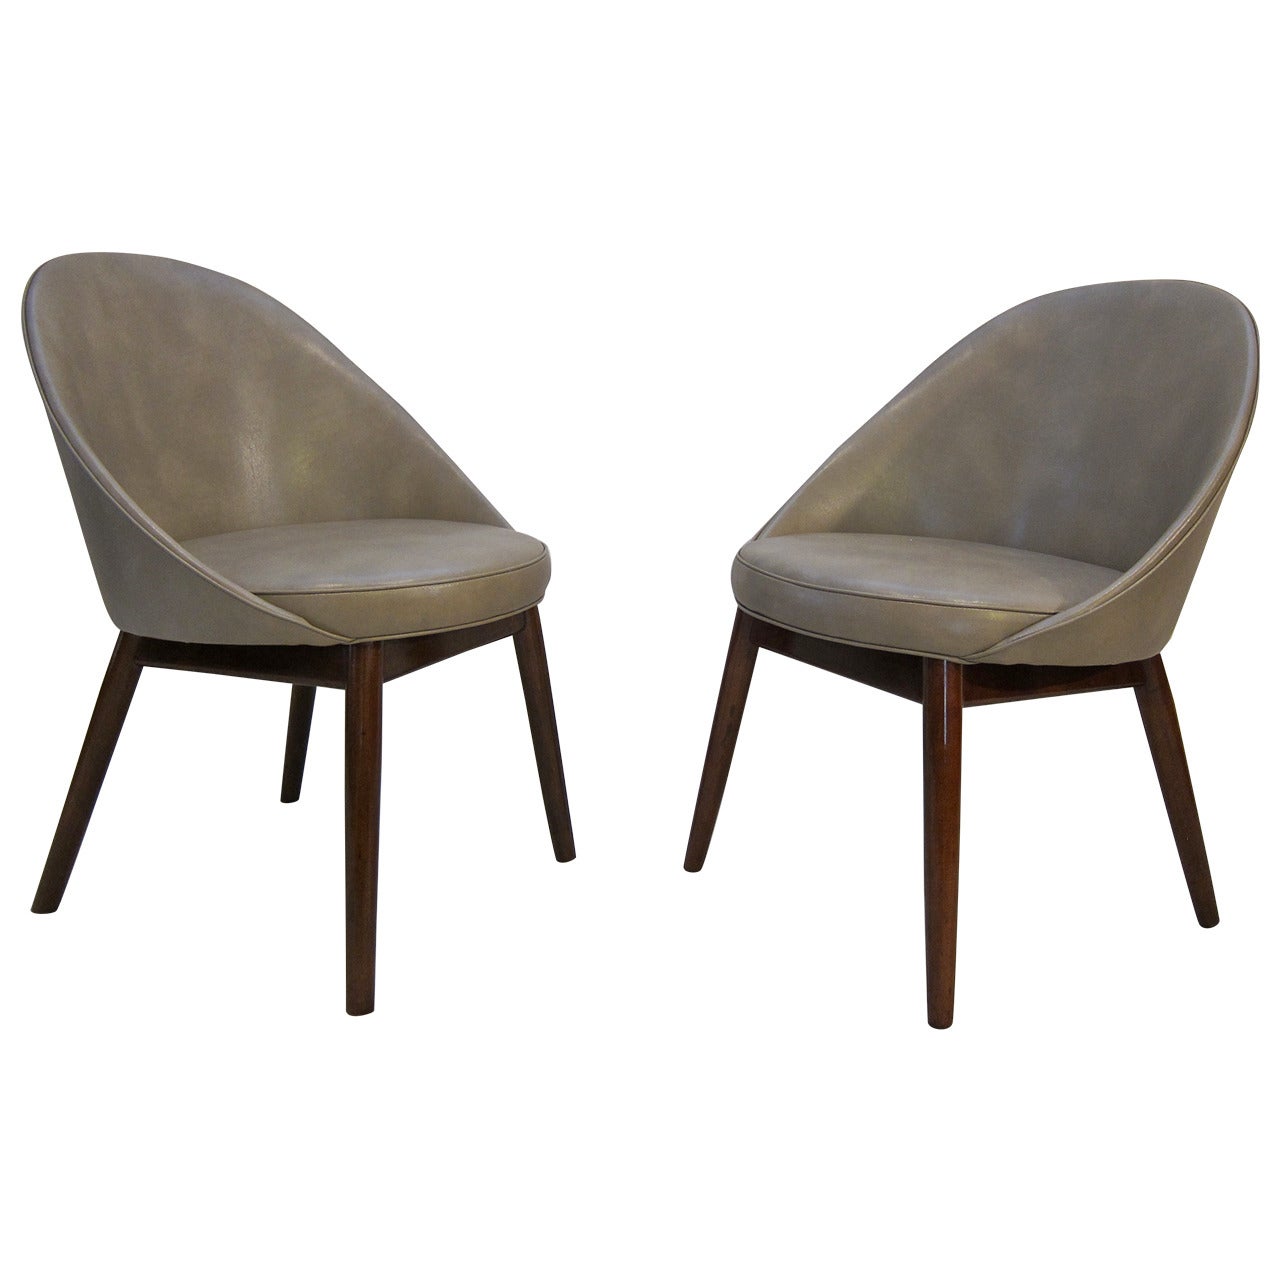 Pair of Danish Chairs Attributed to Ejvind Johansson